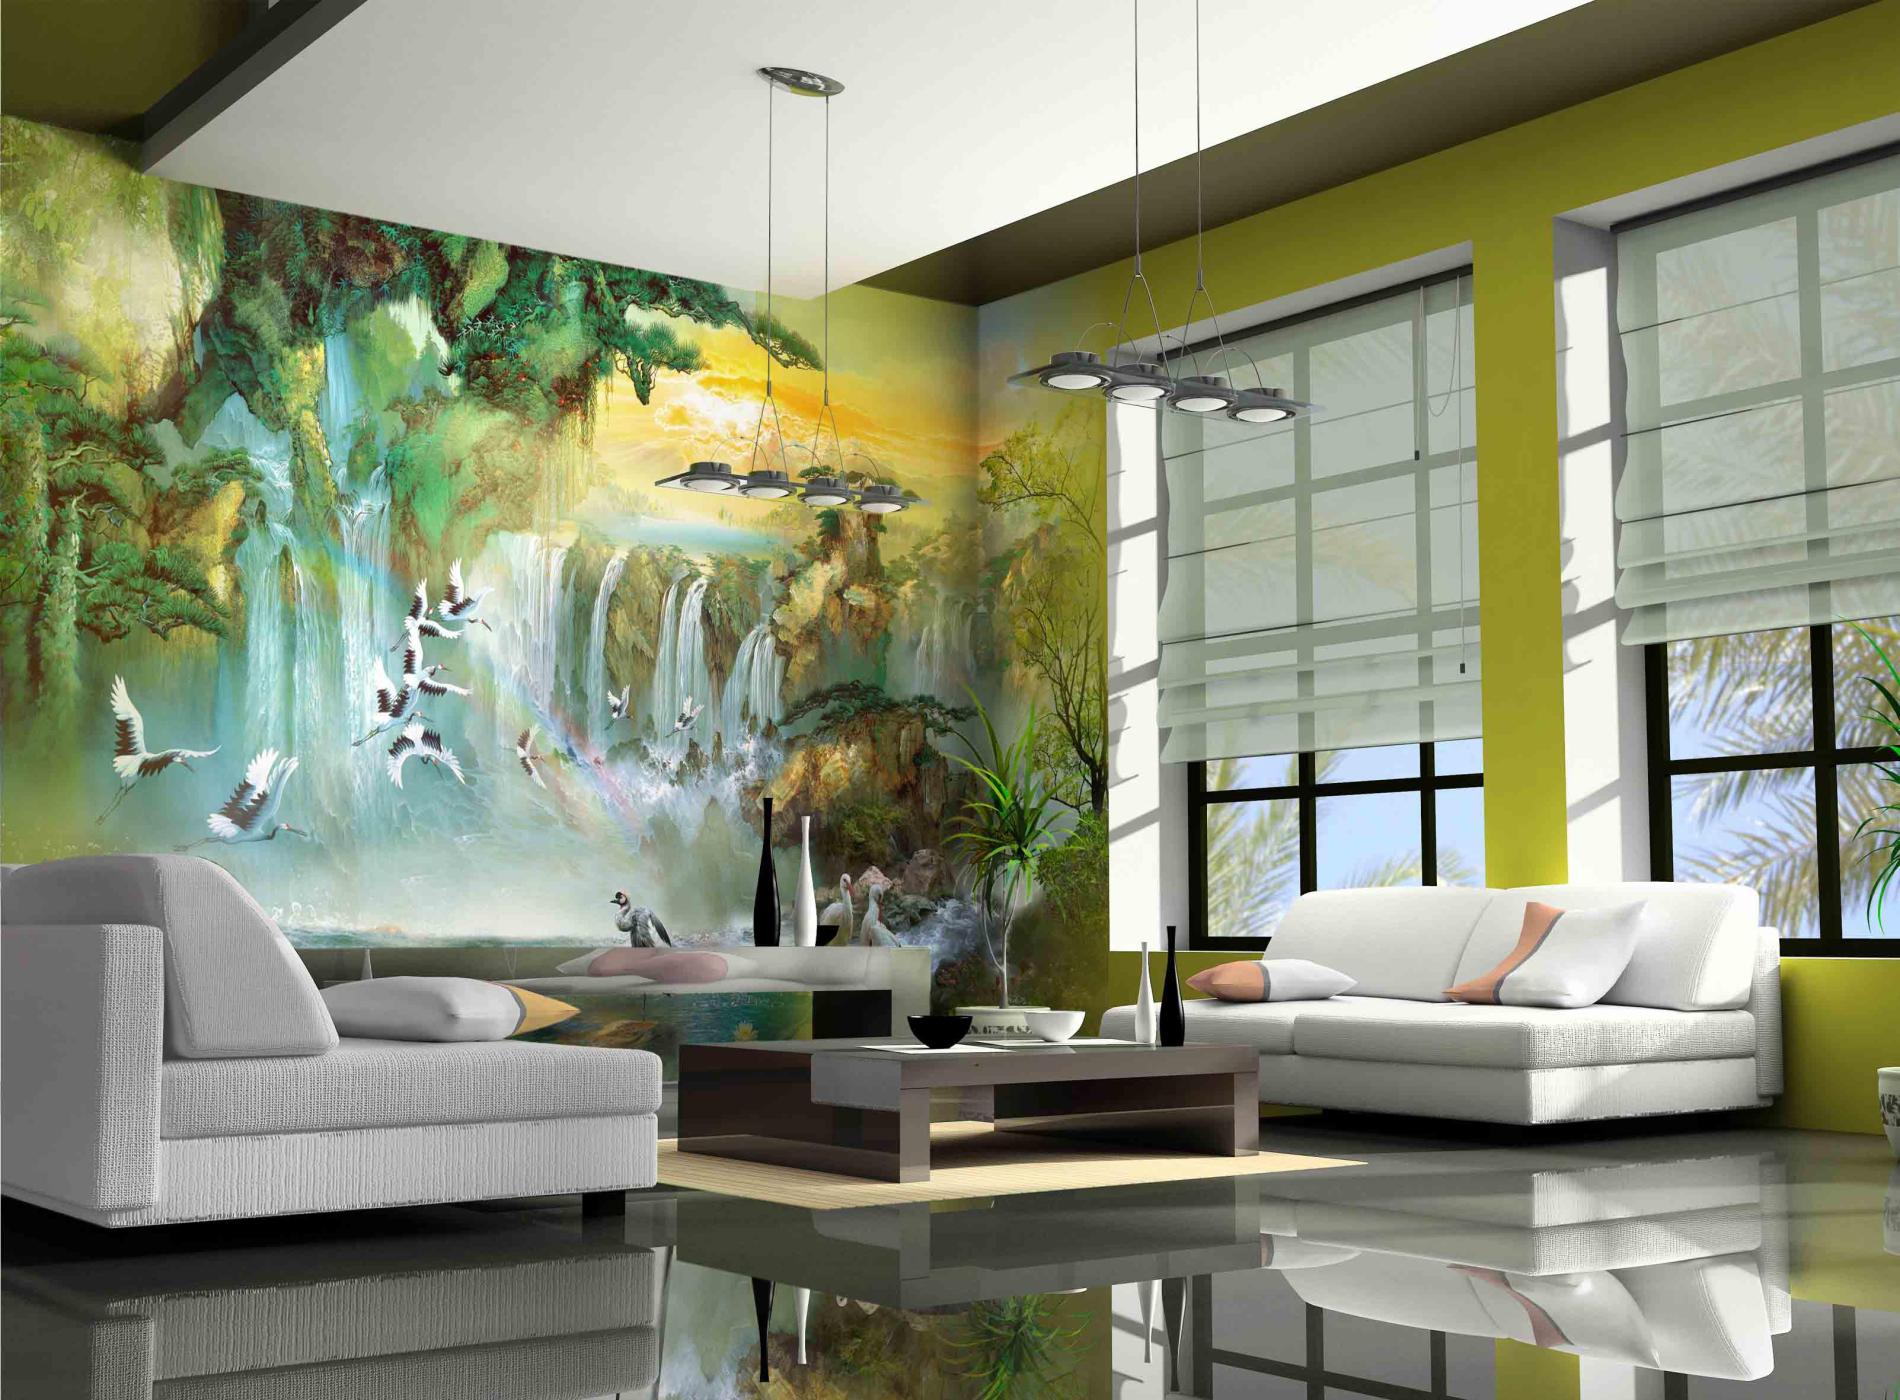 Nature art wall decoration "width =" 1900 "height =" 1400 "srcset =" https://mileray.com/wp-content/uploads/2020/05/1588516145_207_Modern-Living-Room-Designs-With-Perfect-and-Awesome-Art-Decor.jpg 1900w, https://mileray.com/wp -content / uploads / 2016/10 / Applico-300x221.jpg 300w, https://mileray.com/wp-content/uploads/2016/10/Applico-768x566.jpg 768w, https://mileray.com/wp -content / uploads / 2016/10 / Applico-1024x755.jpg 1024w, https://mileray.com/wp-content/uploads/2016/10/Applico-80x60.jpg 80w, https://mileray.com/wp -content / uploads / 2016/10 / Applico-696x513.jpg 696w, https://mileray.com/wp-content/uploads/2016/10/Applico-1068x787.jpg 1068w, https://mileray.com/wp -content / uploads / 2016/10 / Applico-570x420.jpg 570w "sizes =" (maximum width: 1900px) 100vw, 1900px